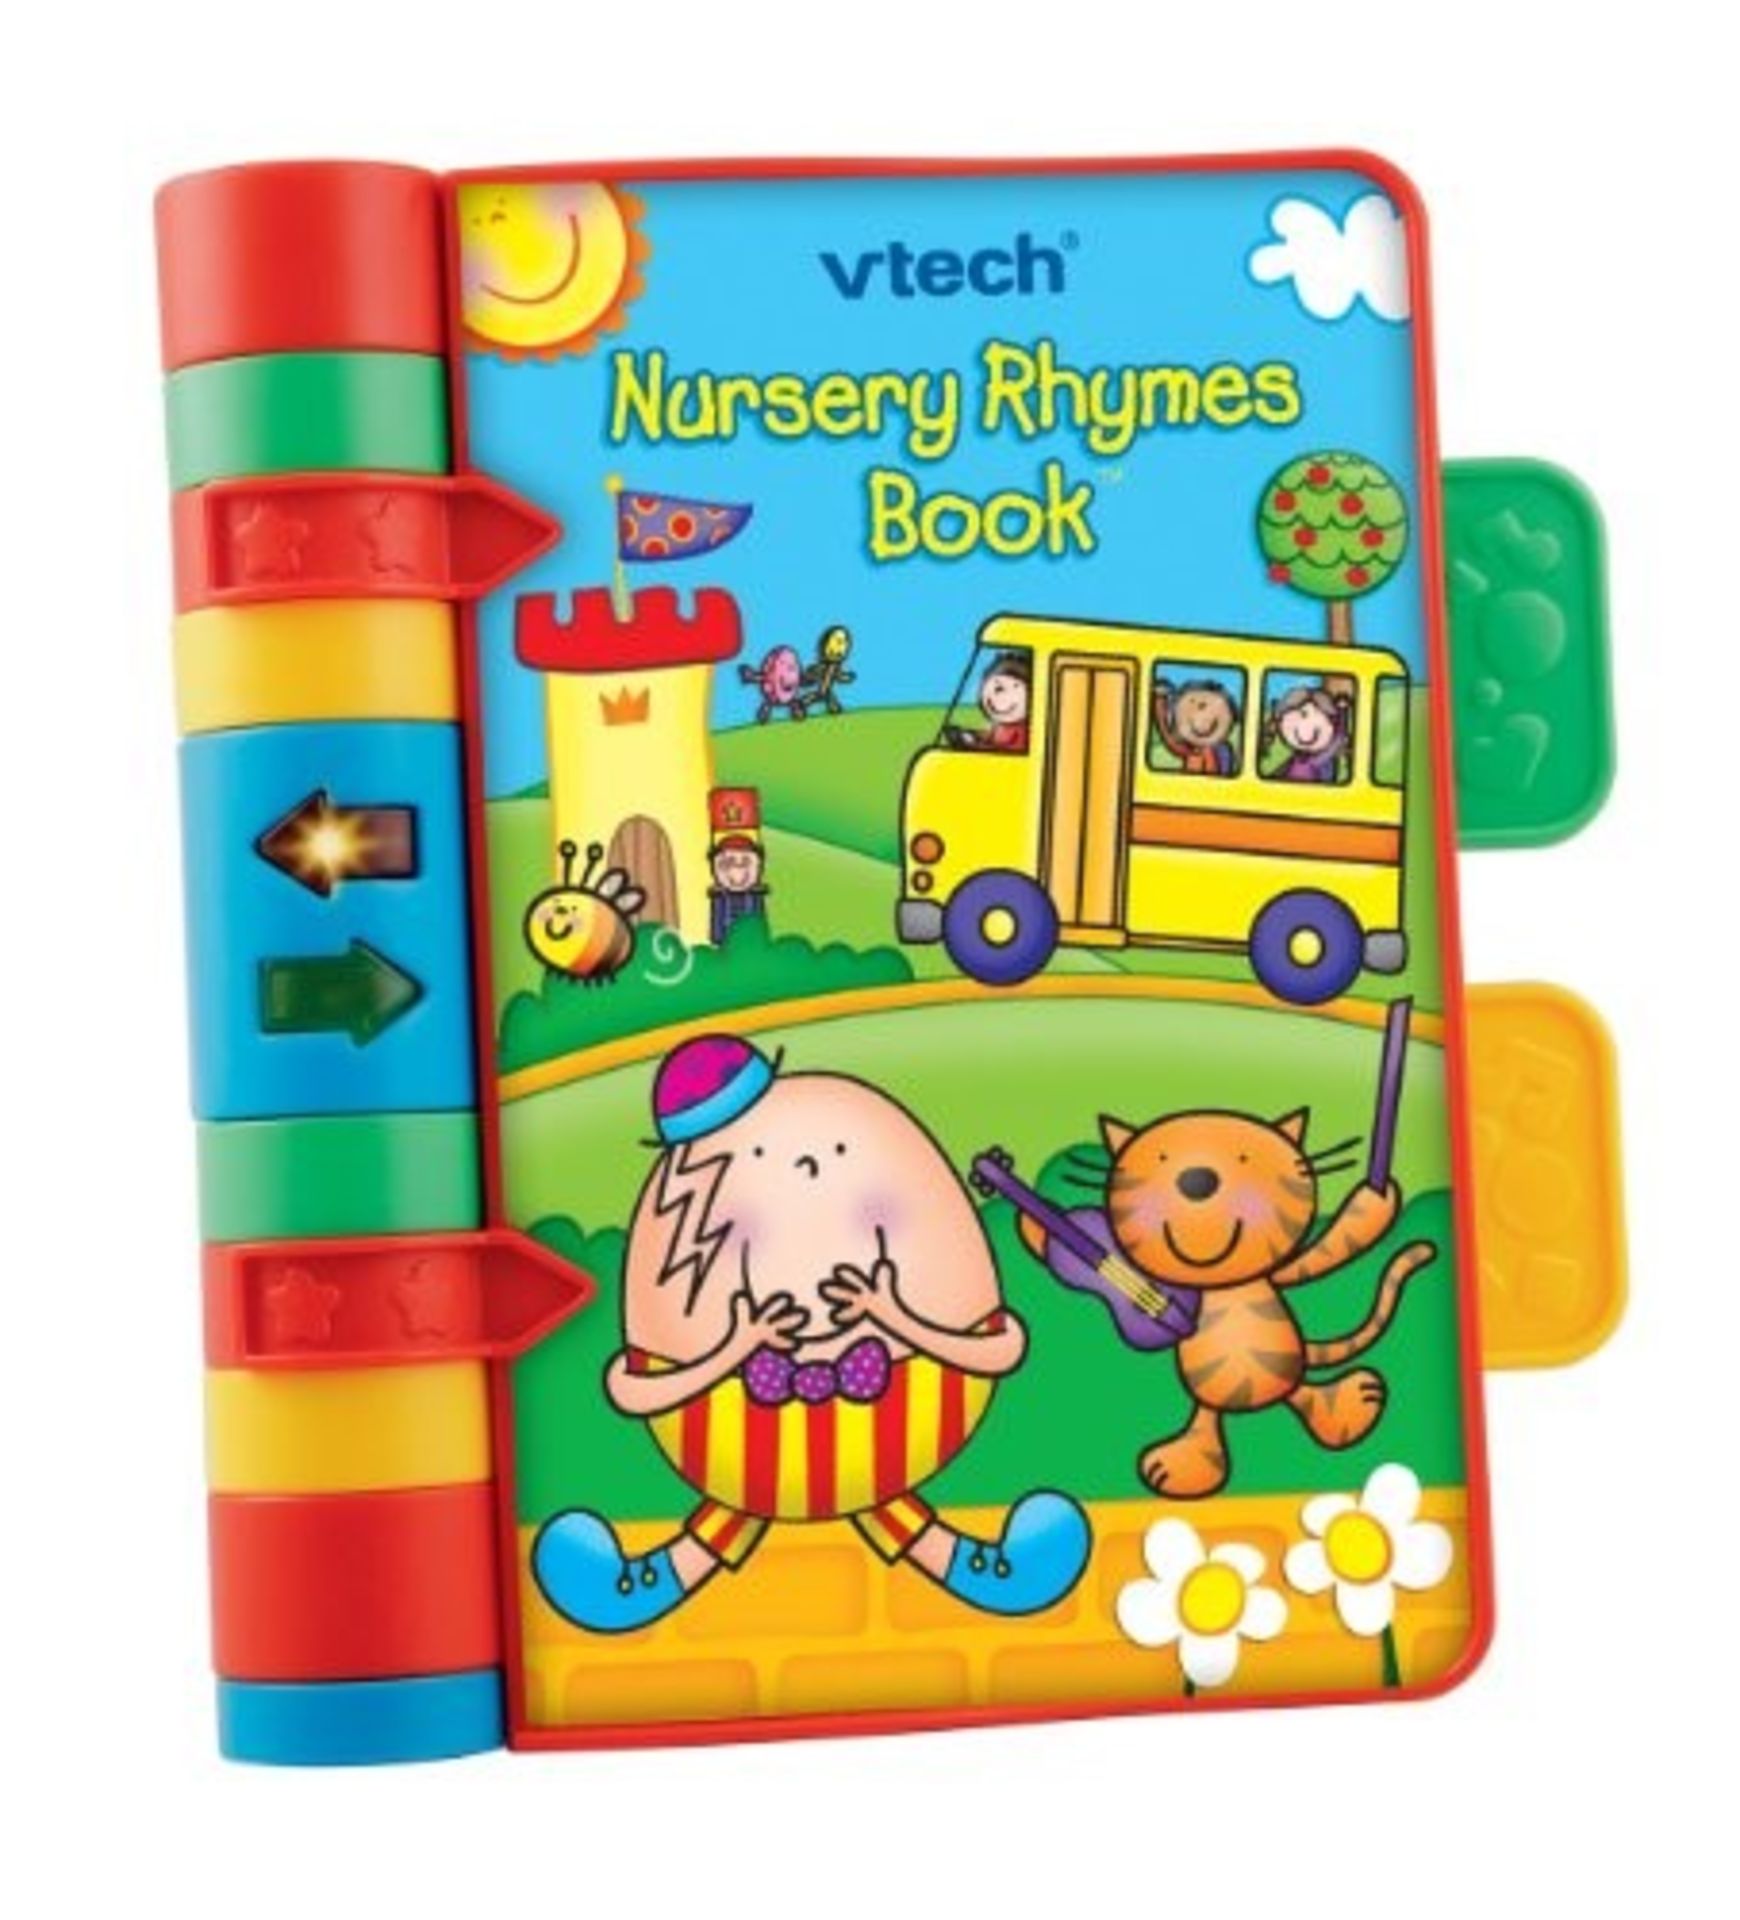 VTech Baby Nursery Rhymes Book | Light Up, Interactive, Musical Baby Book with Sounds